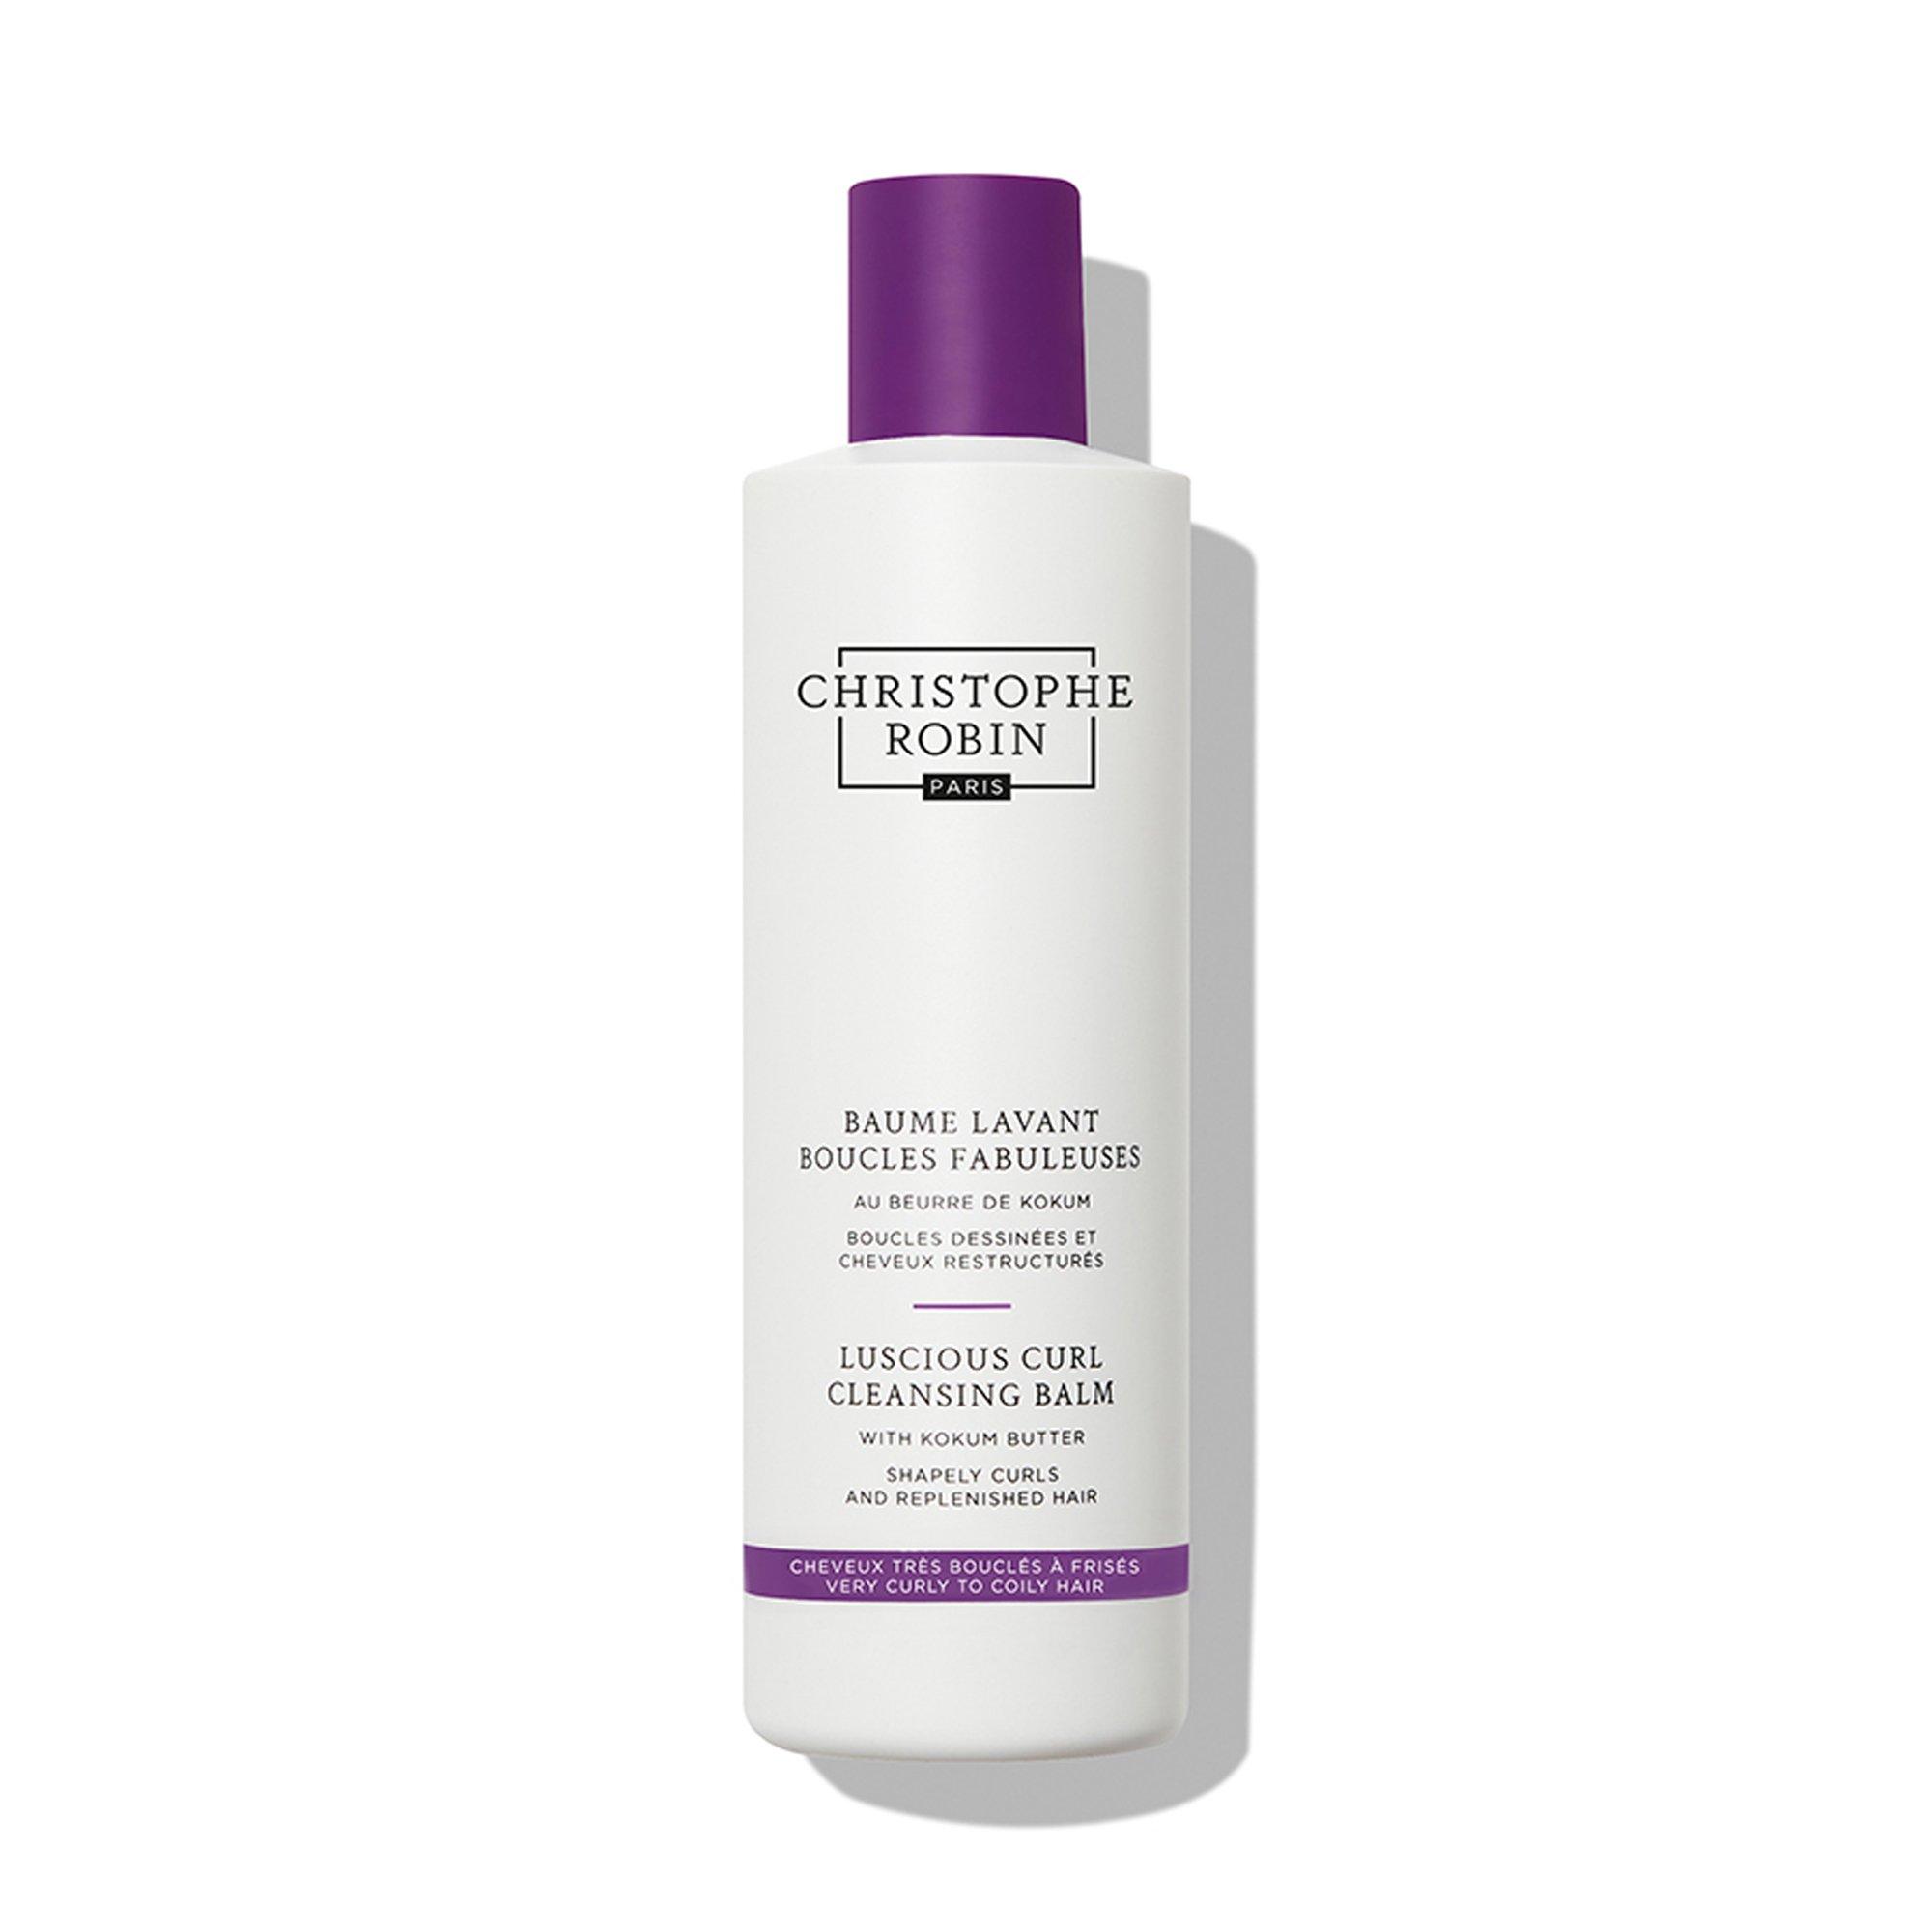 Image of Christophe Robin Luscious Curl Cleansing